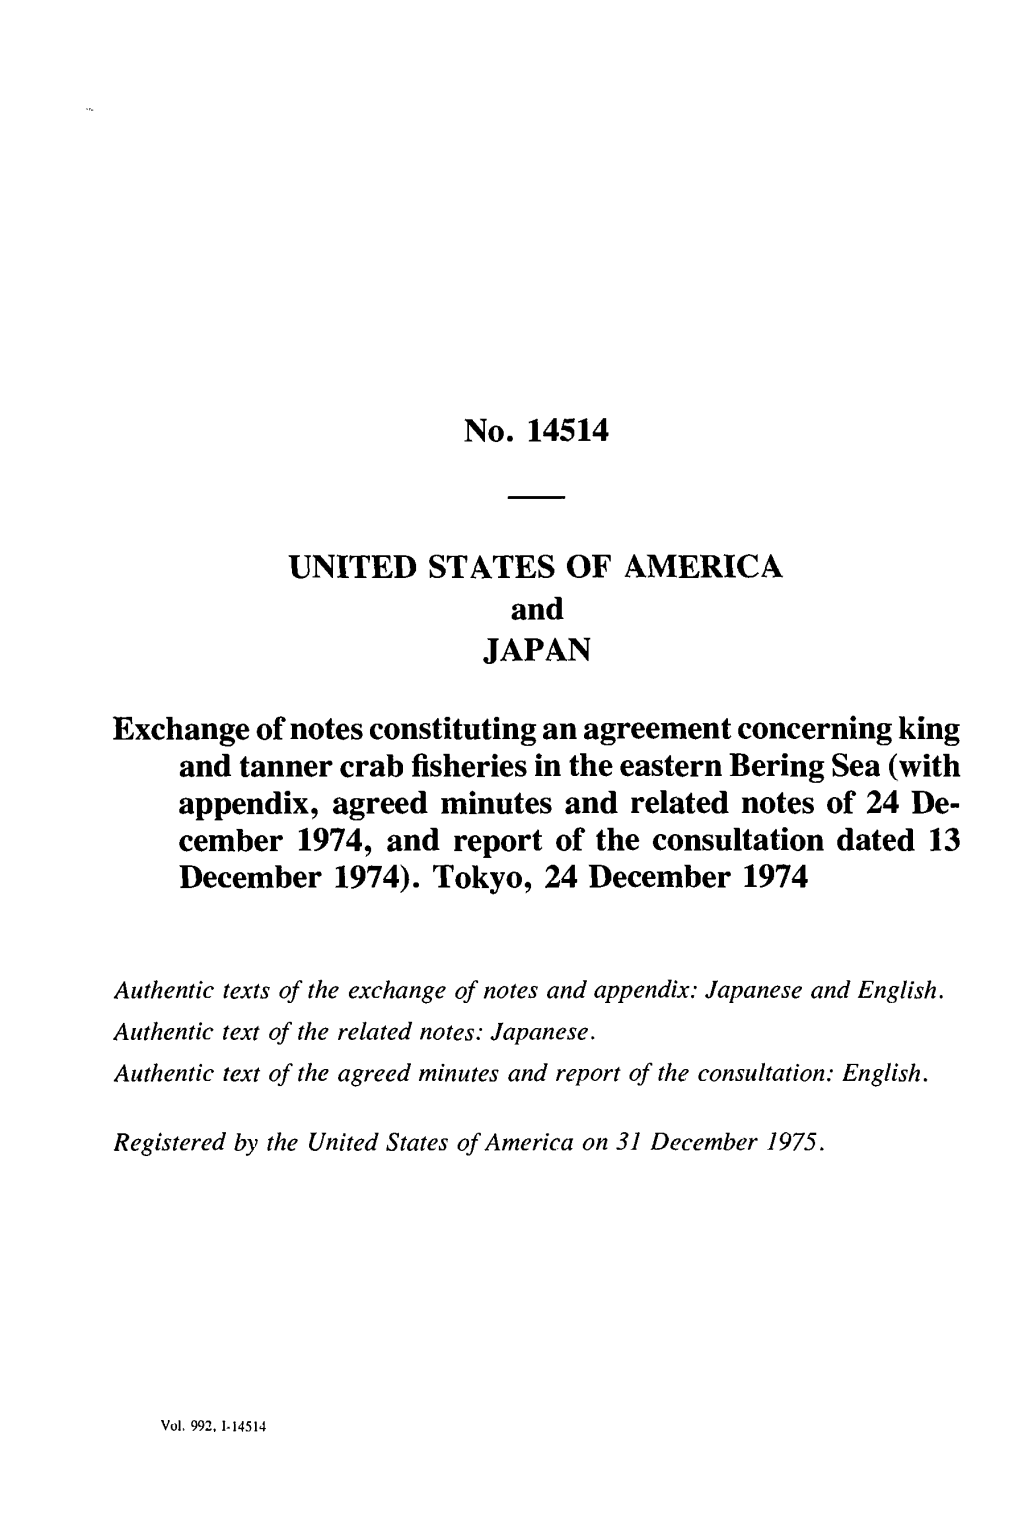 No. 14514 UNITED STATES of AMERICA and JAPAN Exchange of Notes Constituting an Agreement Concerning King and Tanner Crab Fisheri